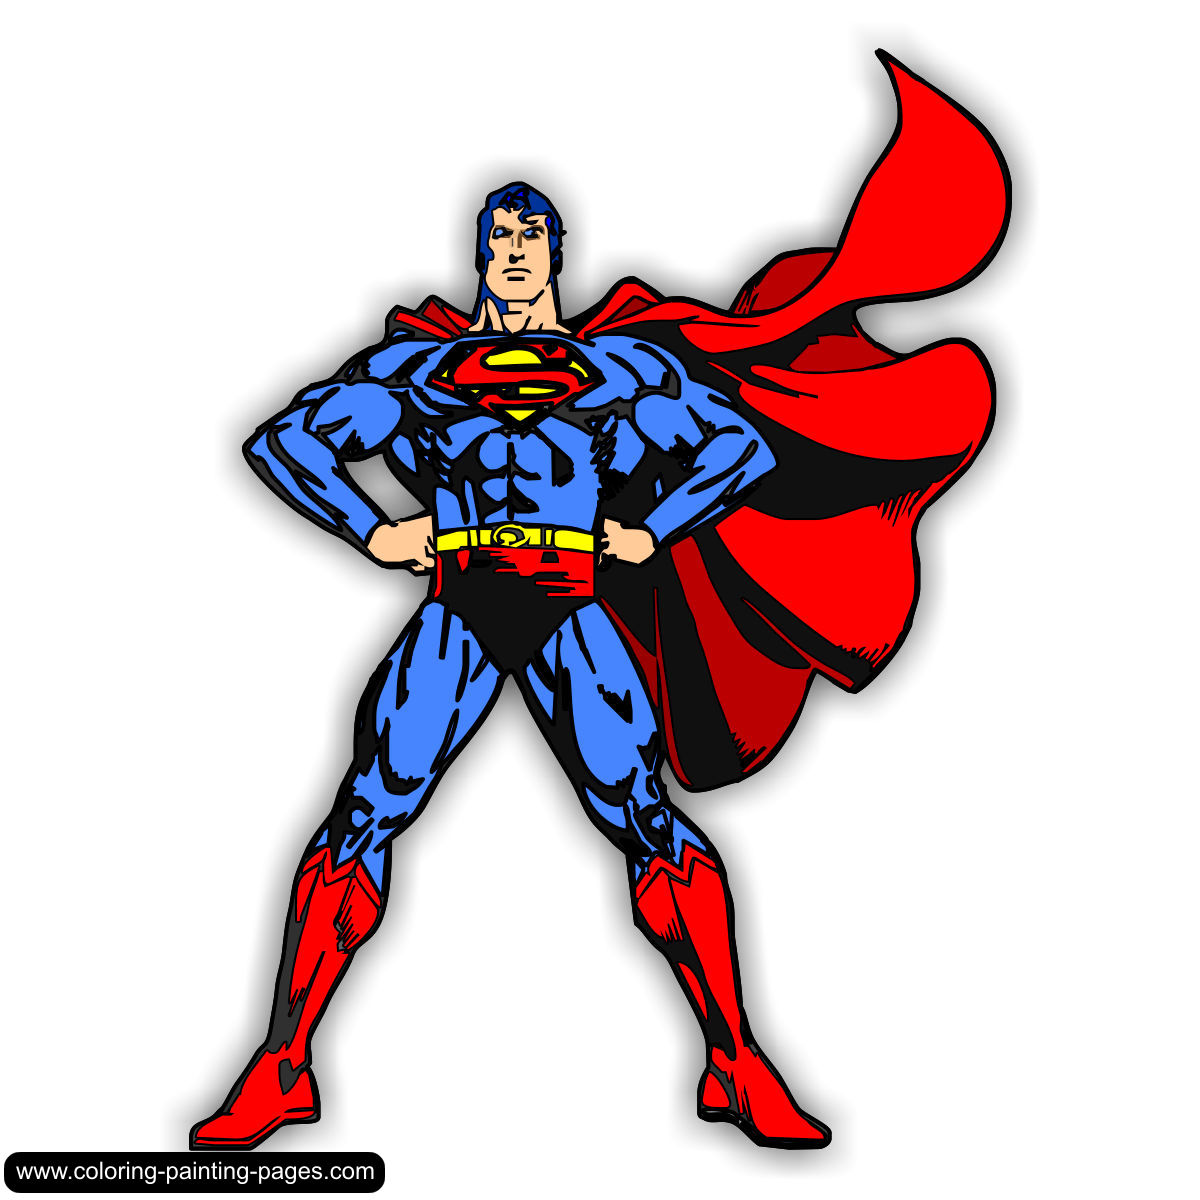 Superman clipart #2, Download drawings